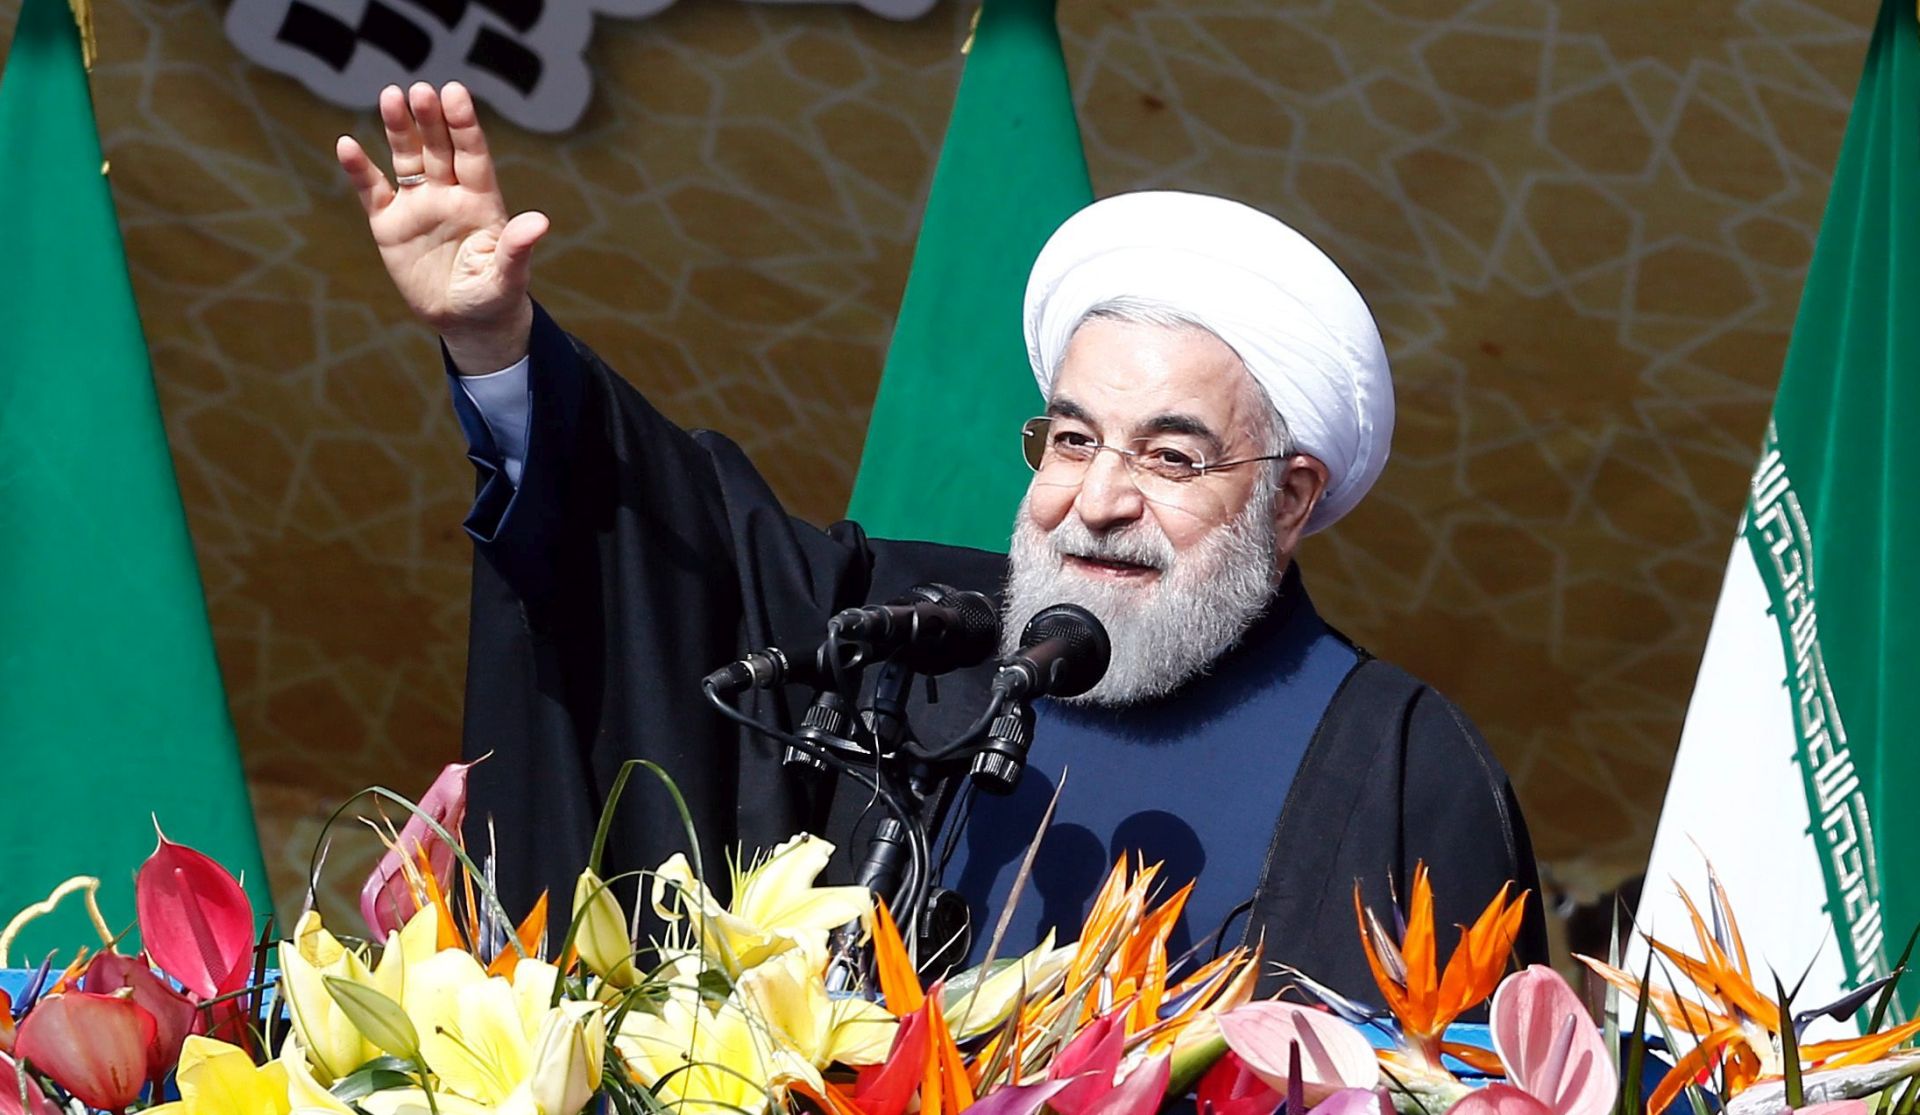 epa05154096 Iranian President Hassan Rouhani waves to the crowd during a ceremony marking the 37th anniversary of the 1979 Islamic revolution, at the Azadi (Freedom) square in Tehran, Iran, 11 February 2016. The event mark the 37th anniversary of the Islamic revolution, which came ten days after Ayatollah Ruhollah Khomeini's return from his exile in Paris to Iran, toppling the monarchy system and forming the Islamic republic.  EPA/ABEDIN TAHERKENAREH